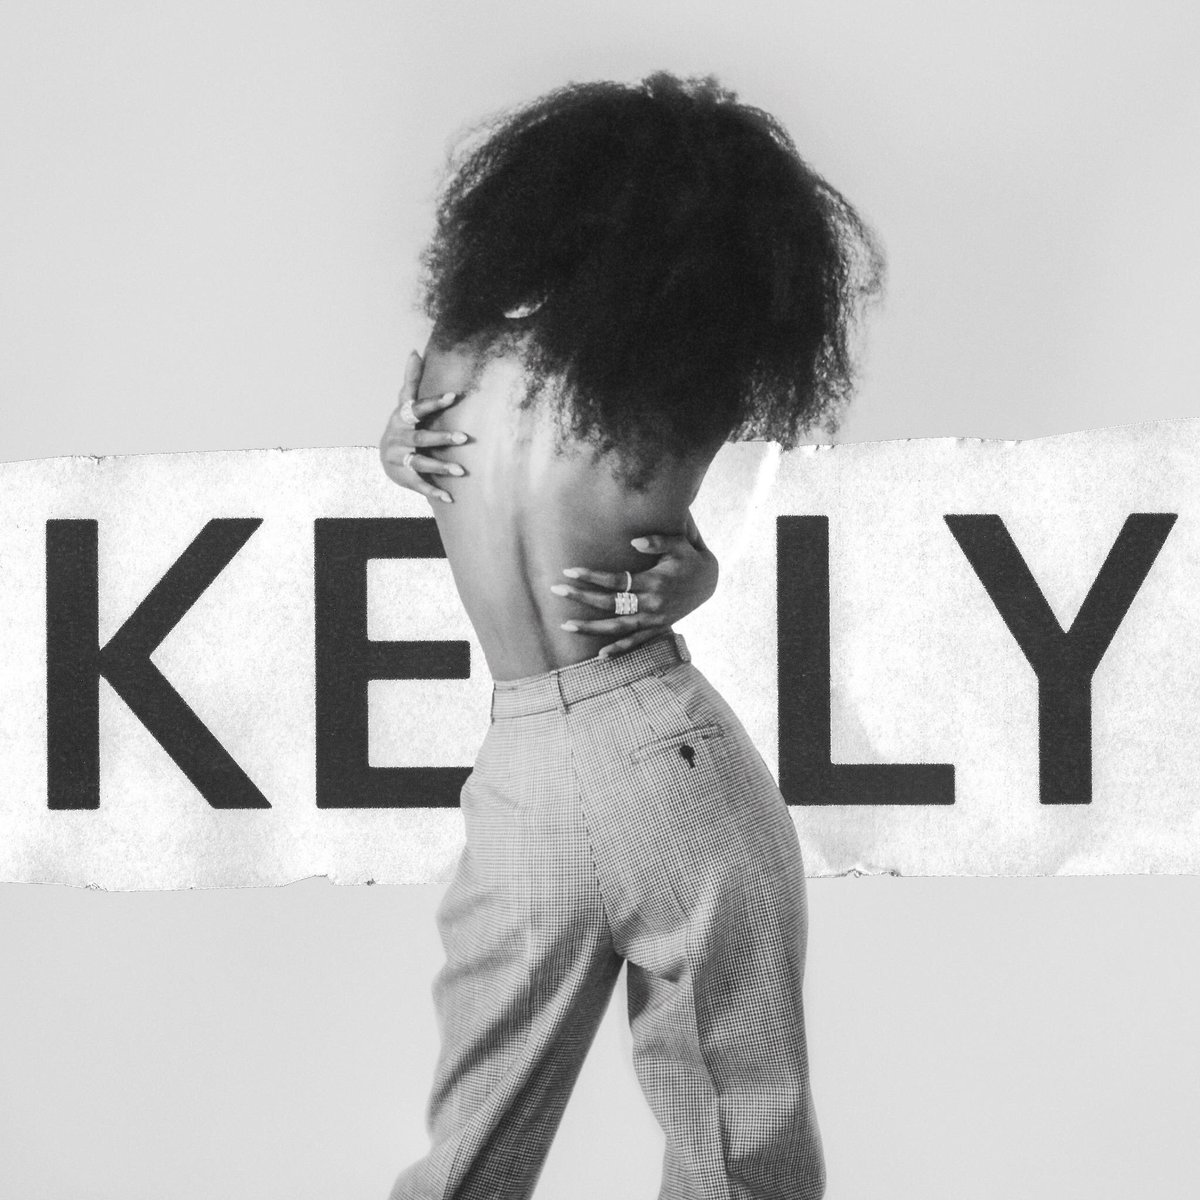 RT @RealMichelleW: Love it! @KELLYROWLAND’s new single “Kelly” is available now! ❤️ #GoKellyGo https://t.co/5Z7XqNo2MP